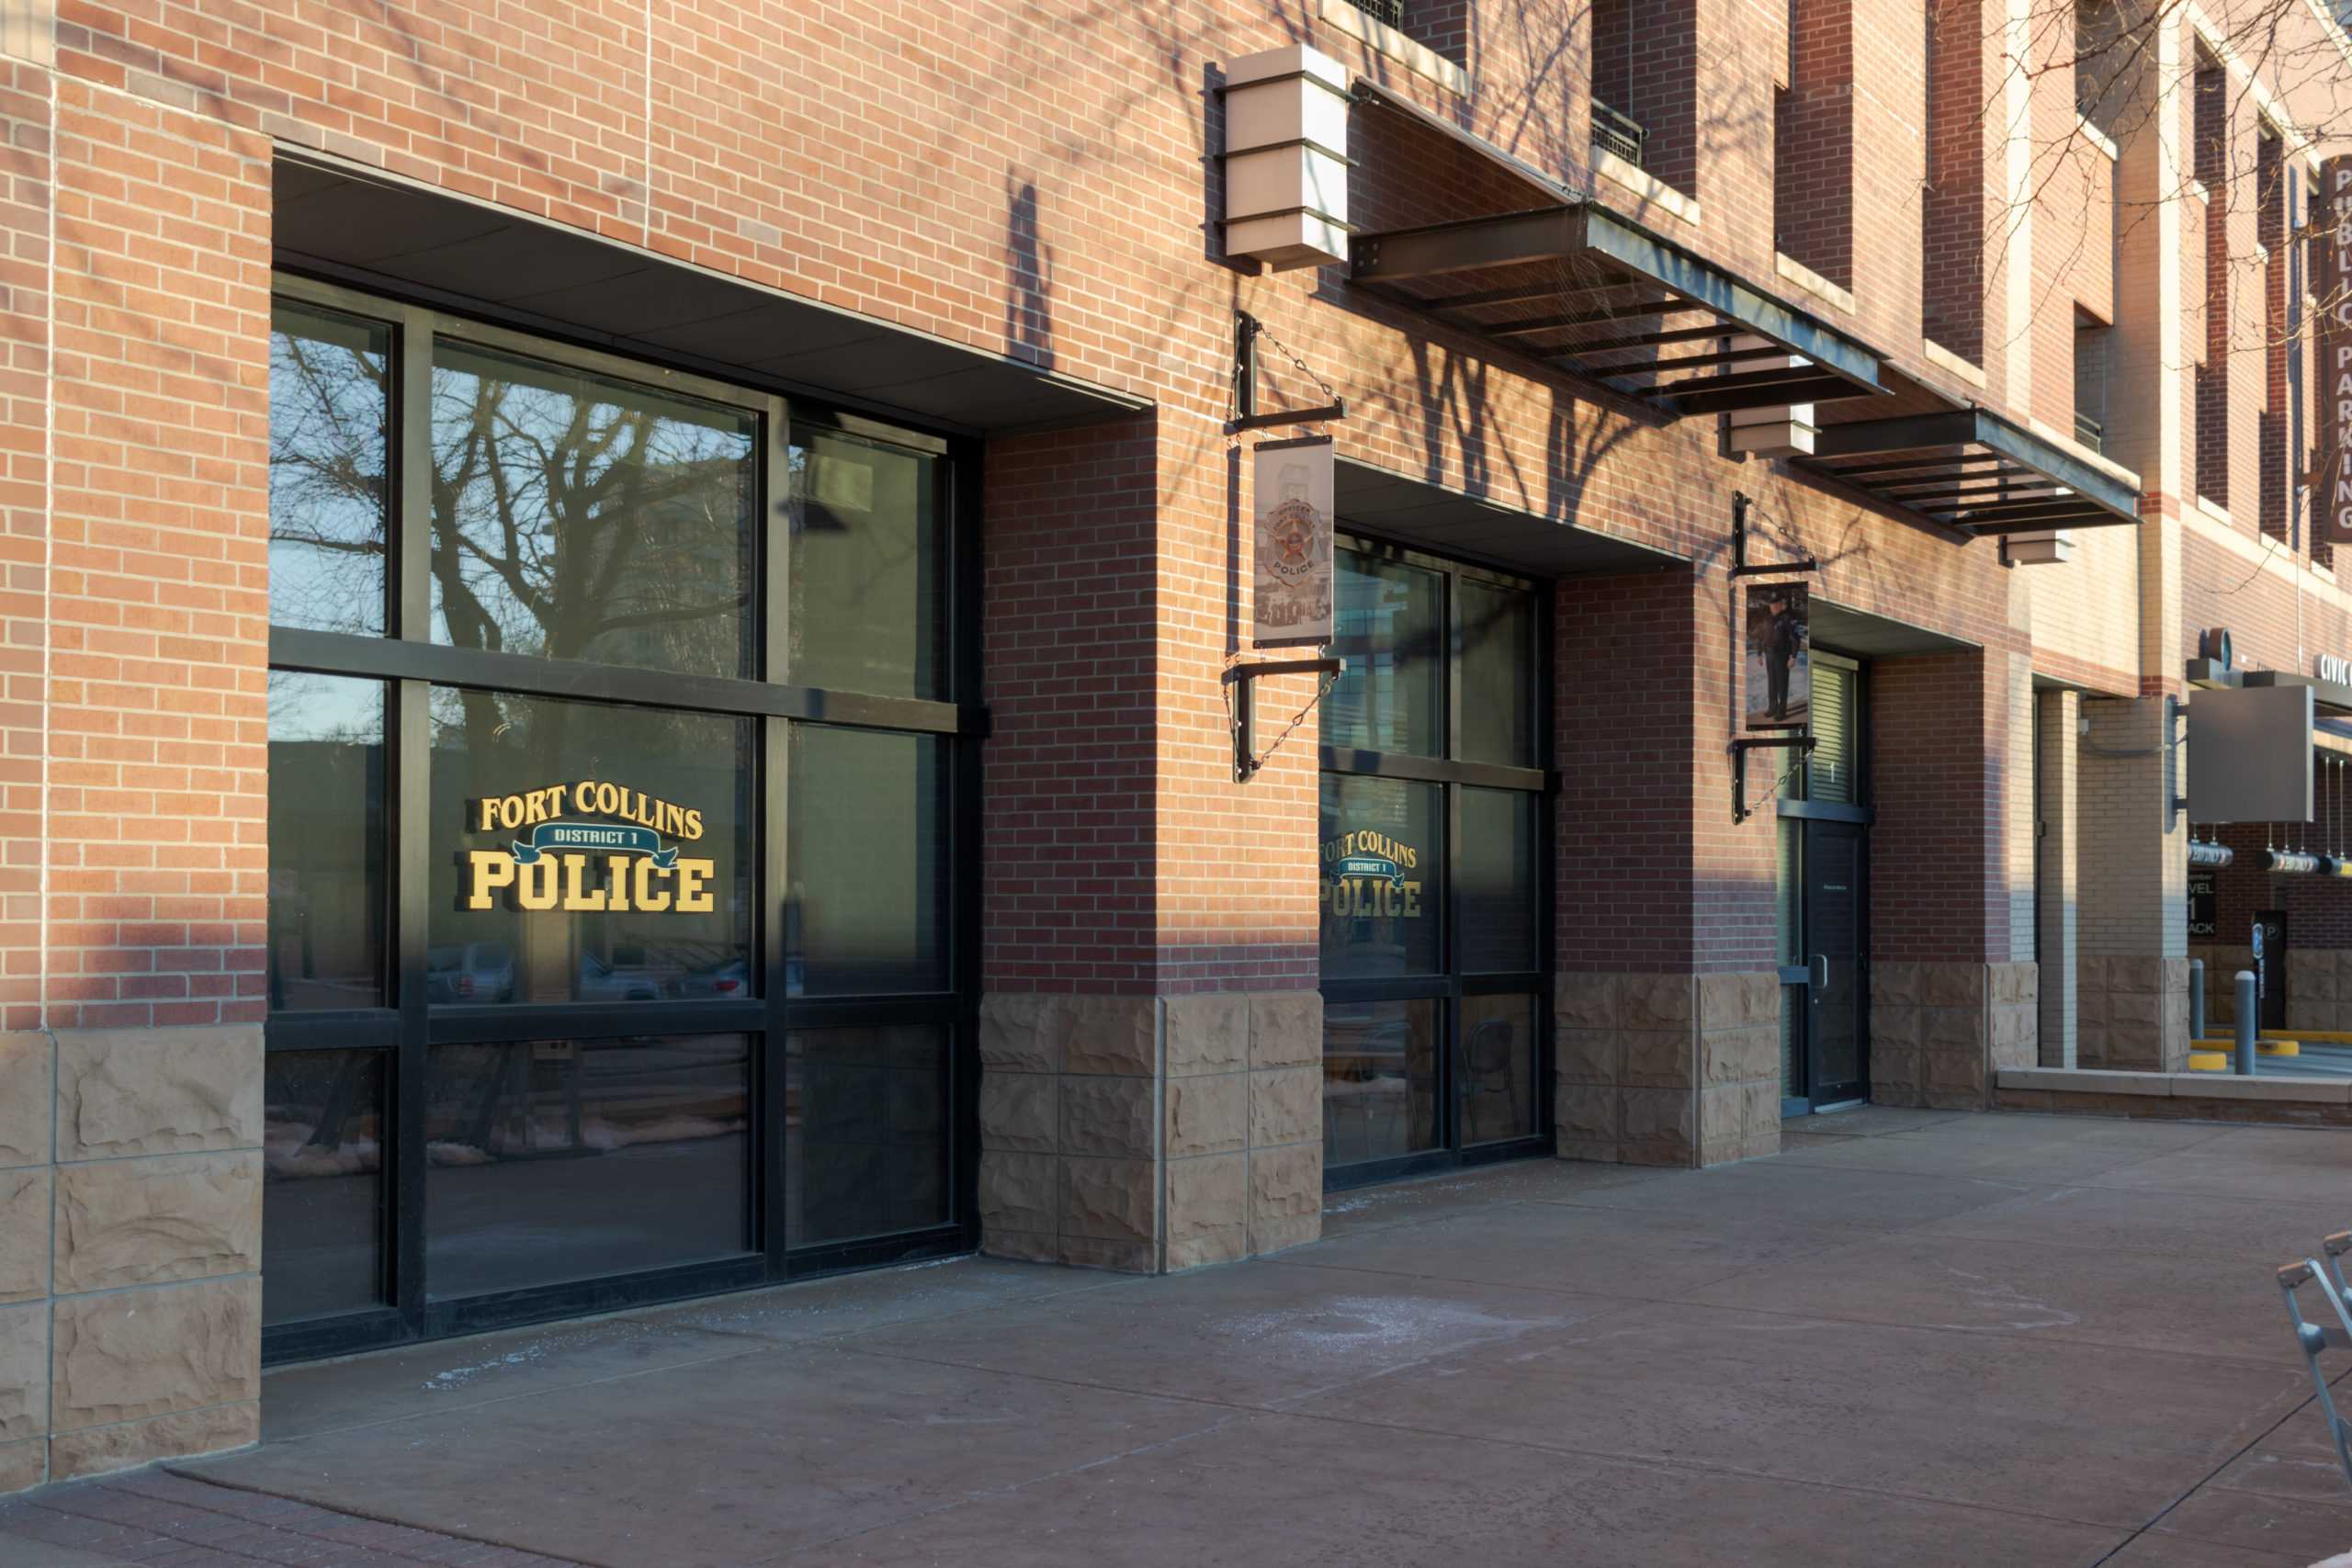 The Fort Collins Police office in Old Town